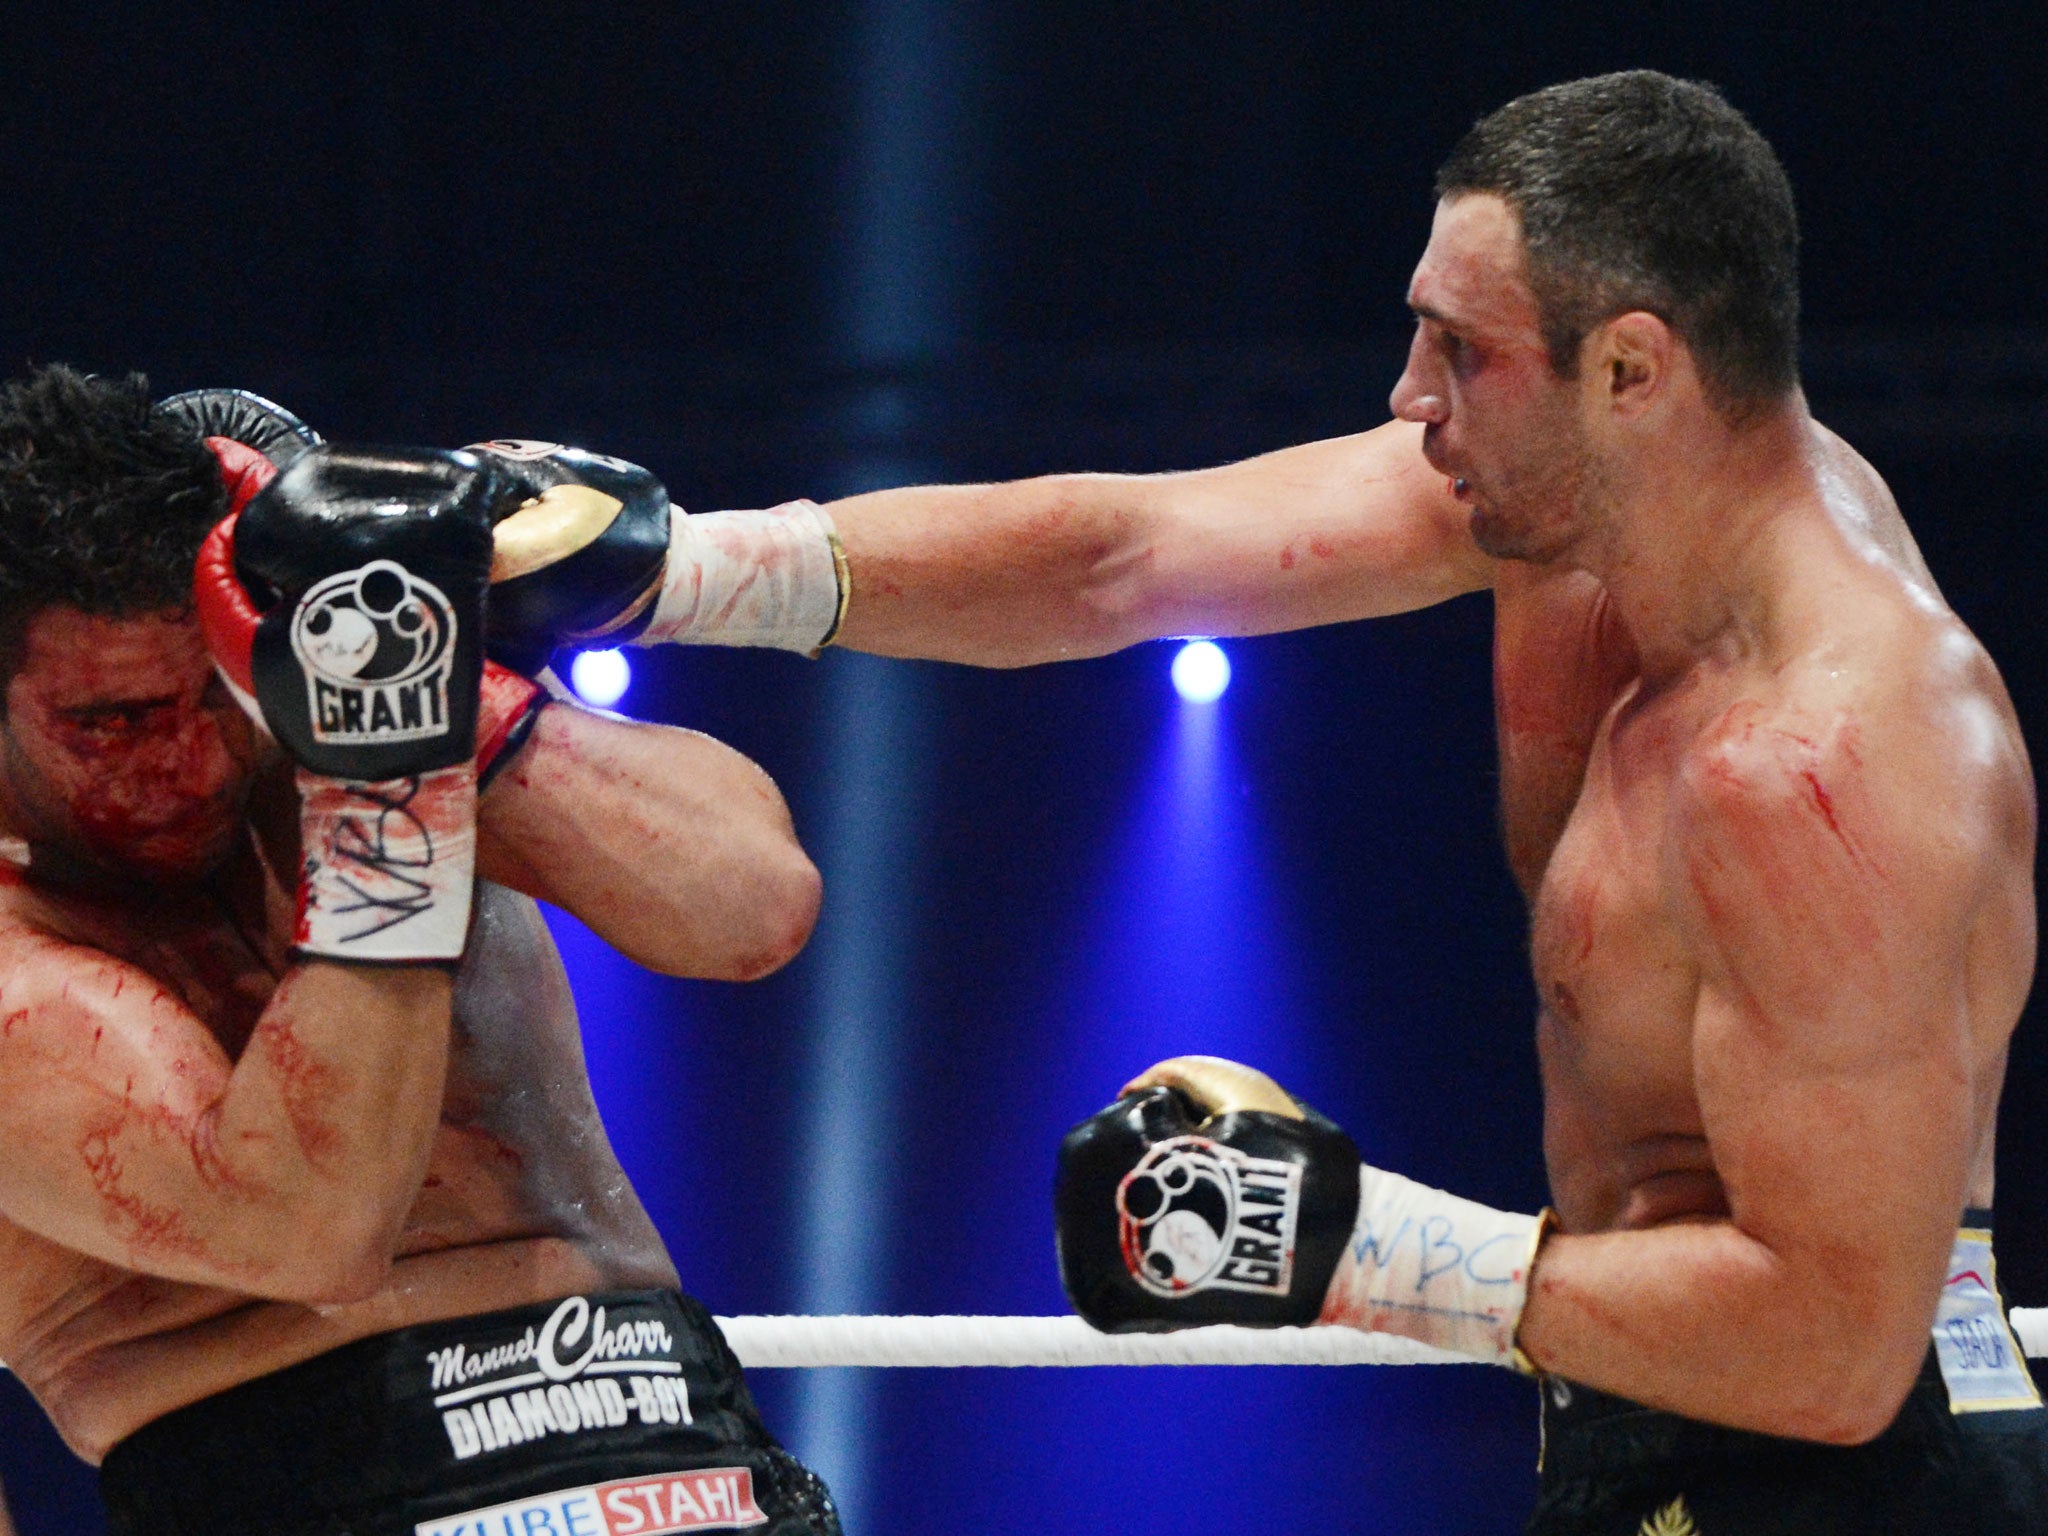 Vitali Klitschko fighting for the defense of his WBC heavyweight title against Germany's Manuel Charr in 2012